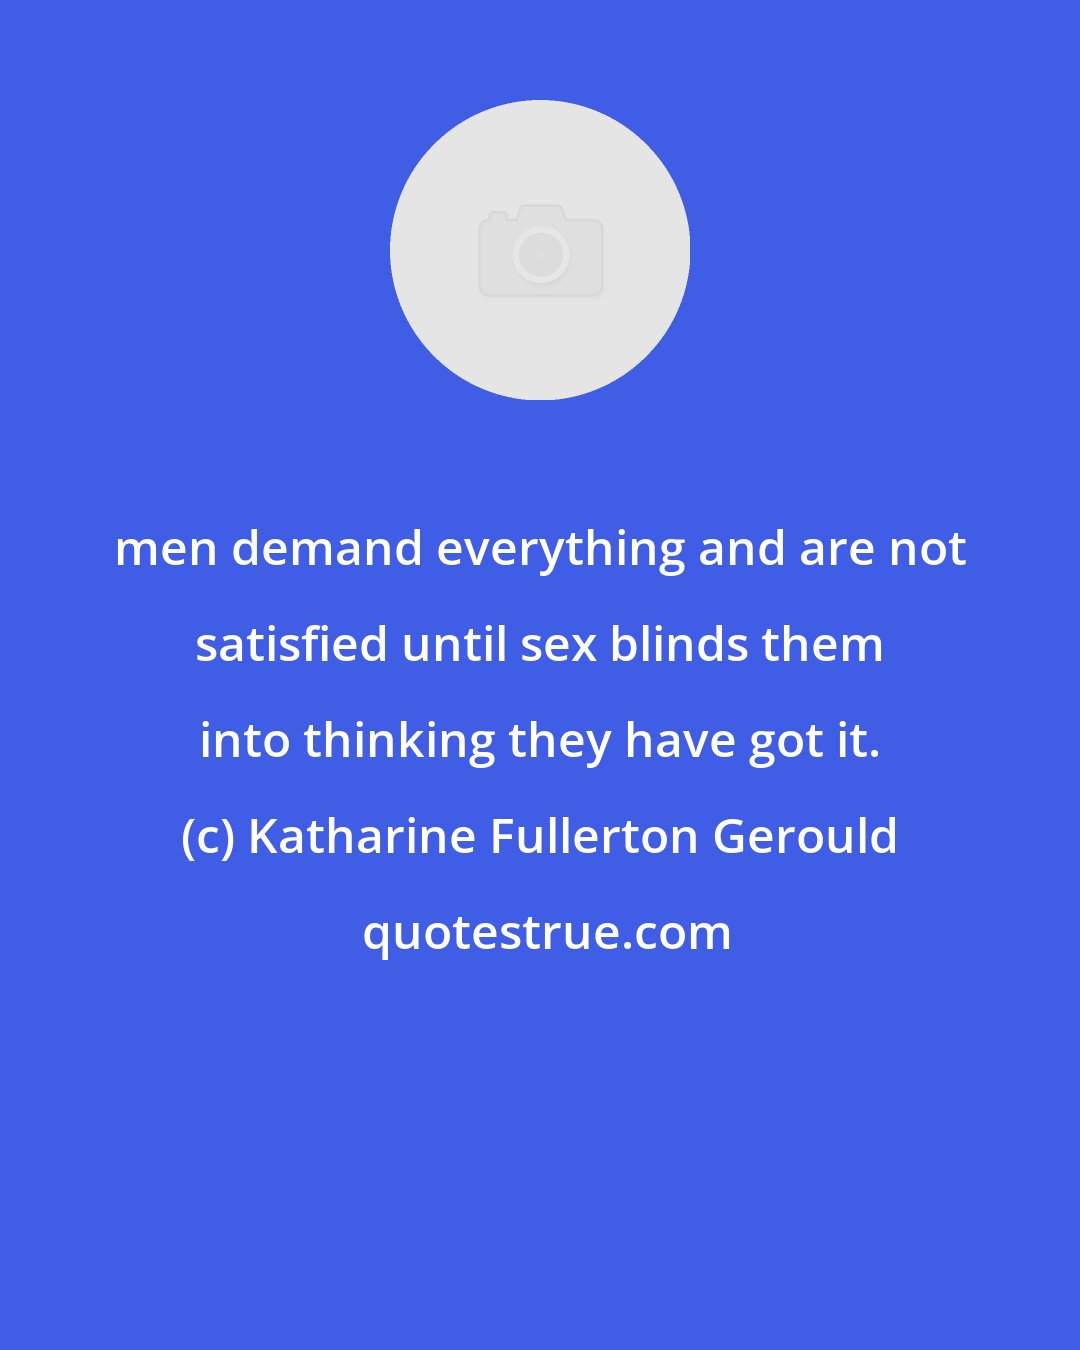 Katharine Fullerton Gerould: men demand everything and are not satisfied until sex blinds them into thinking they have got it.